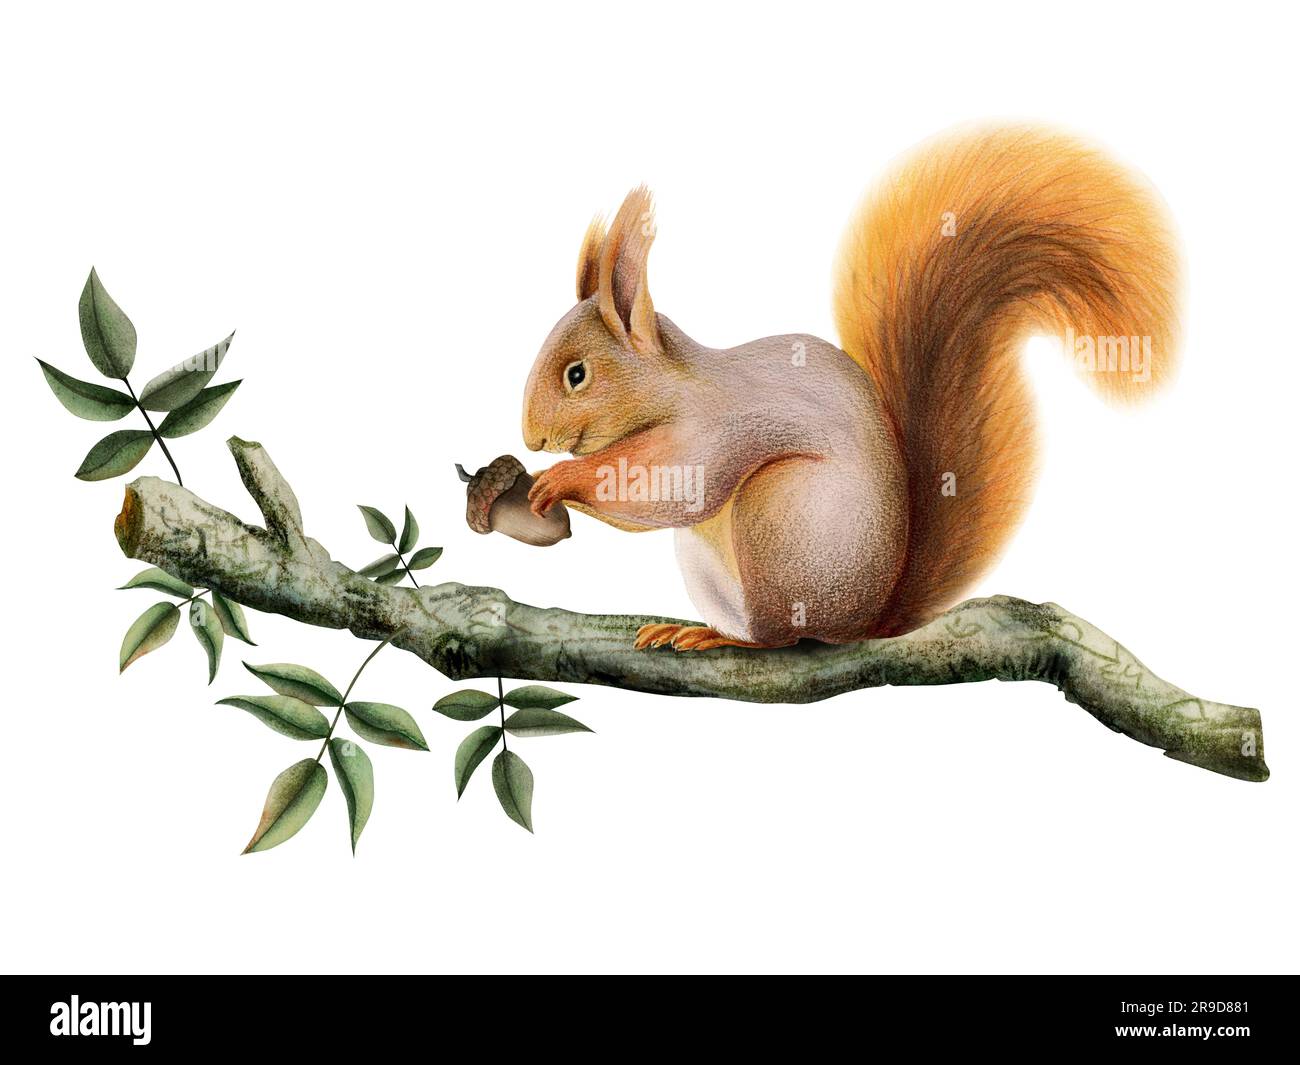 Orange brown squirrel holding an acorn on tree branch with green leaves watercolor illustration of forest animal Stock Photo